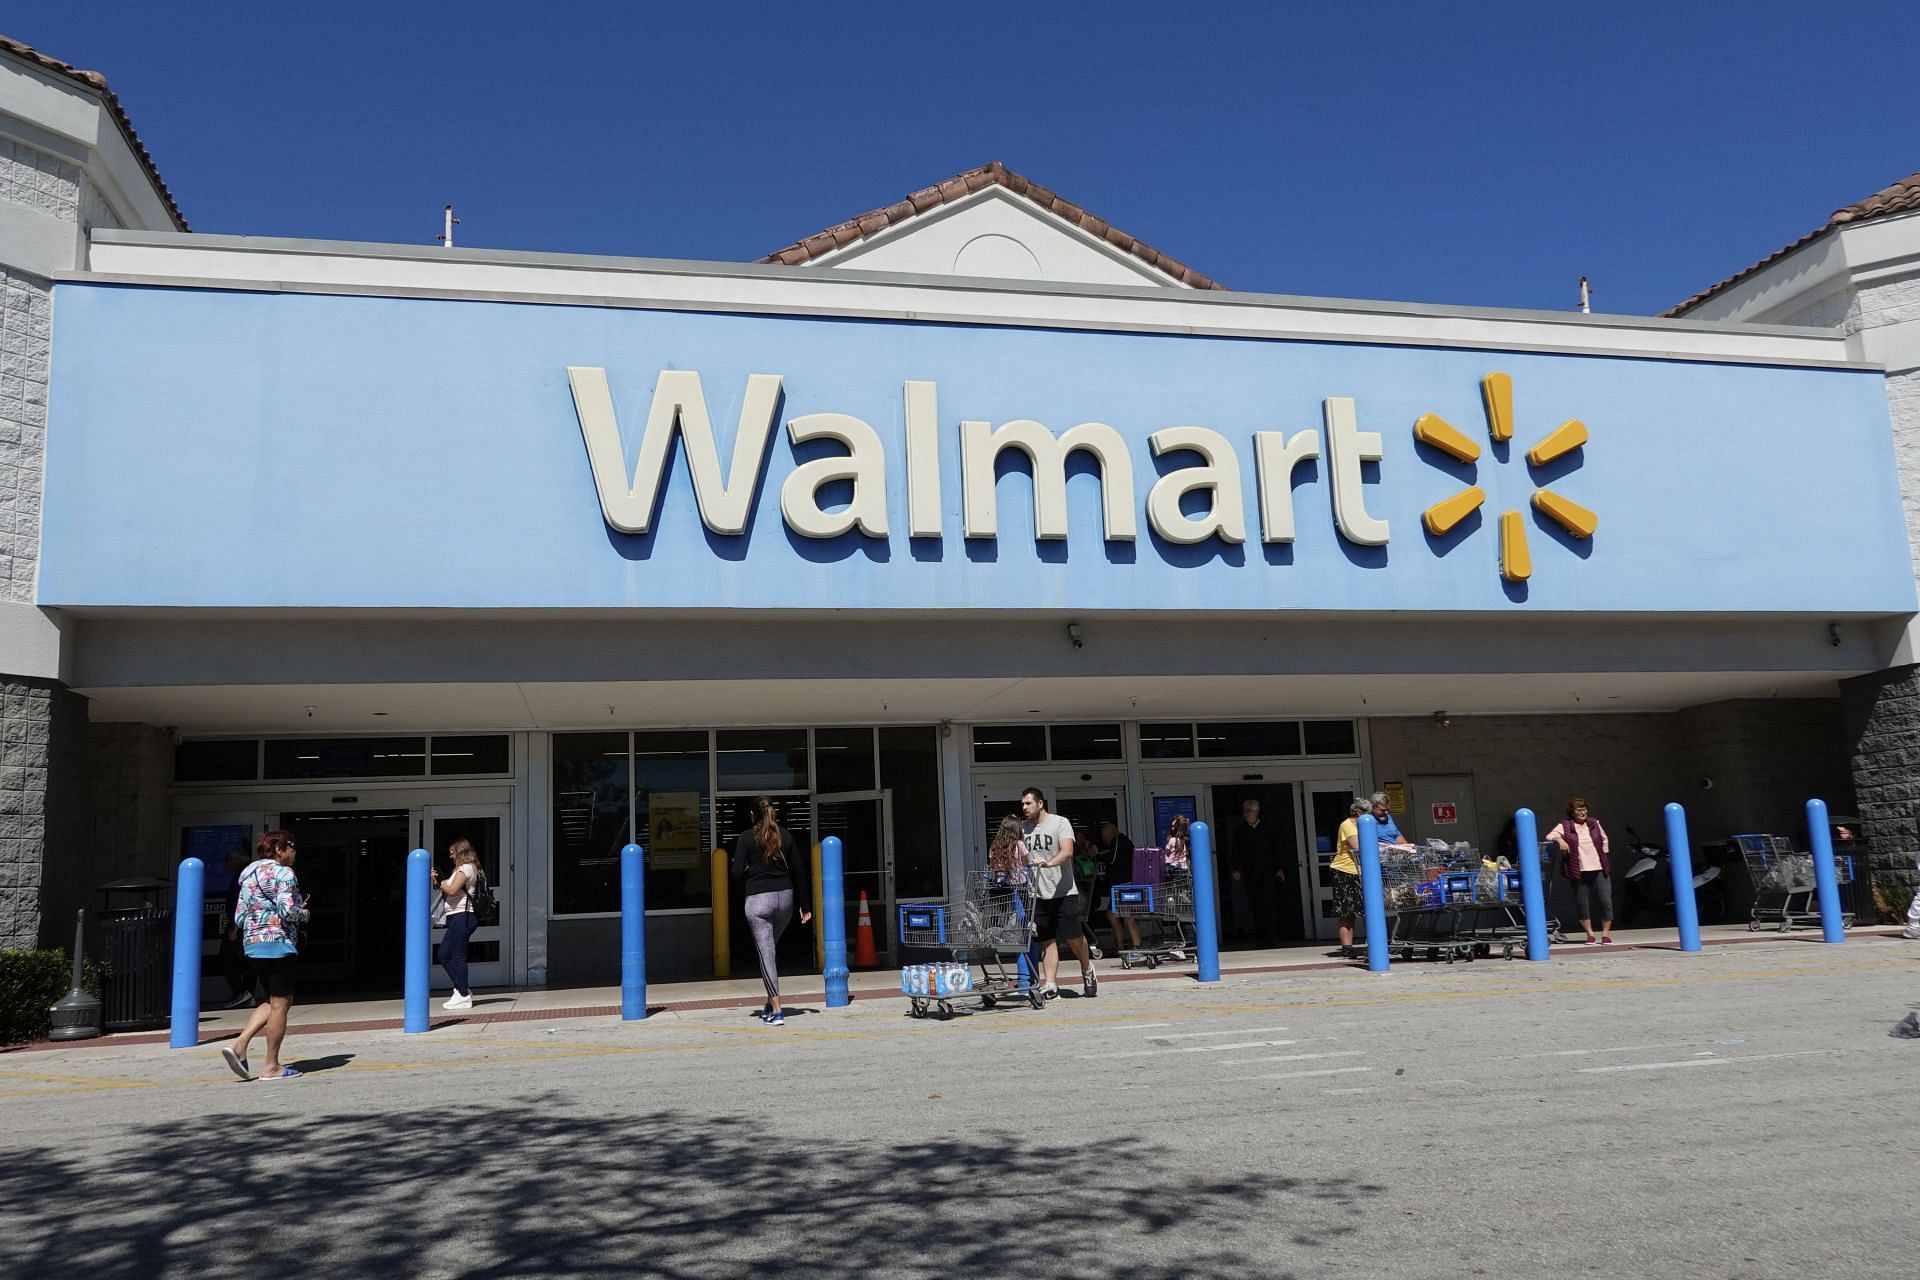 Walmart Reports Strong Quarterly Earnings, Beating Expectations